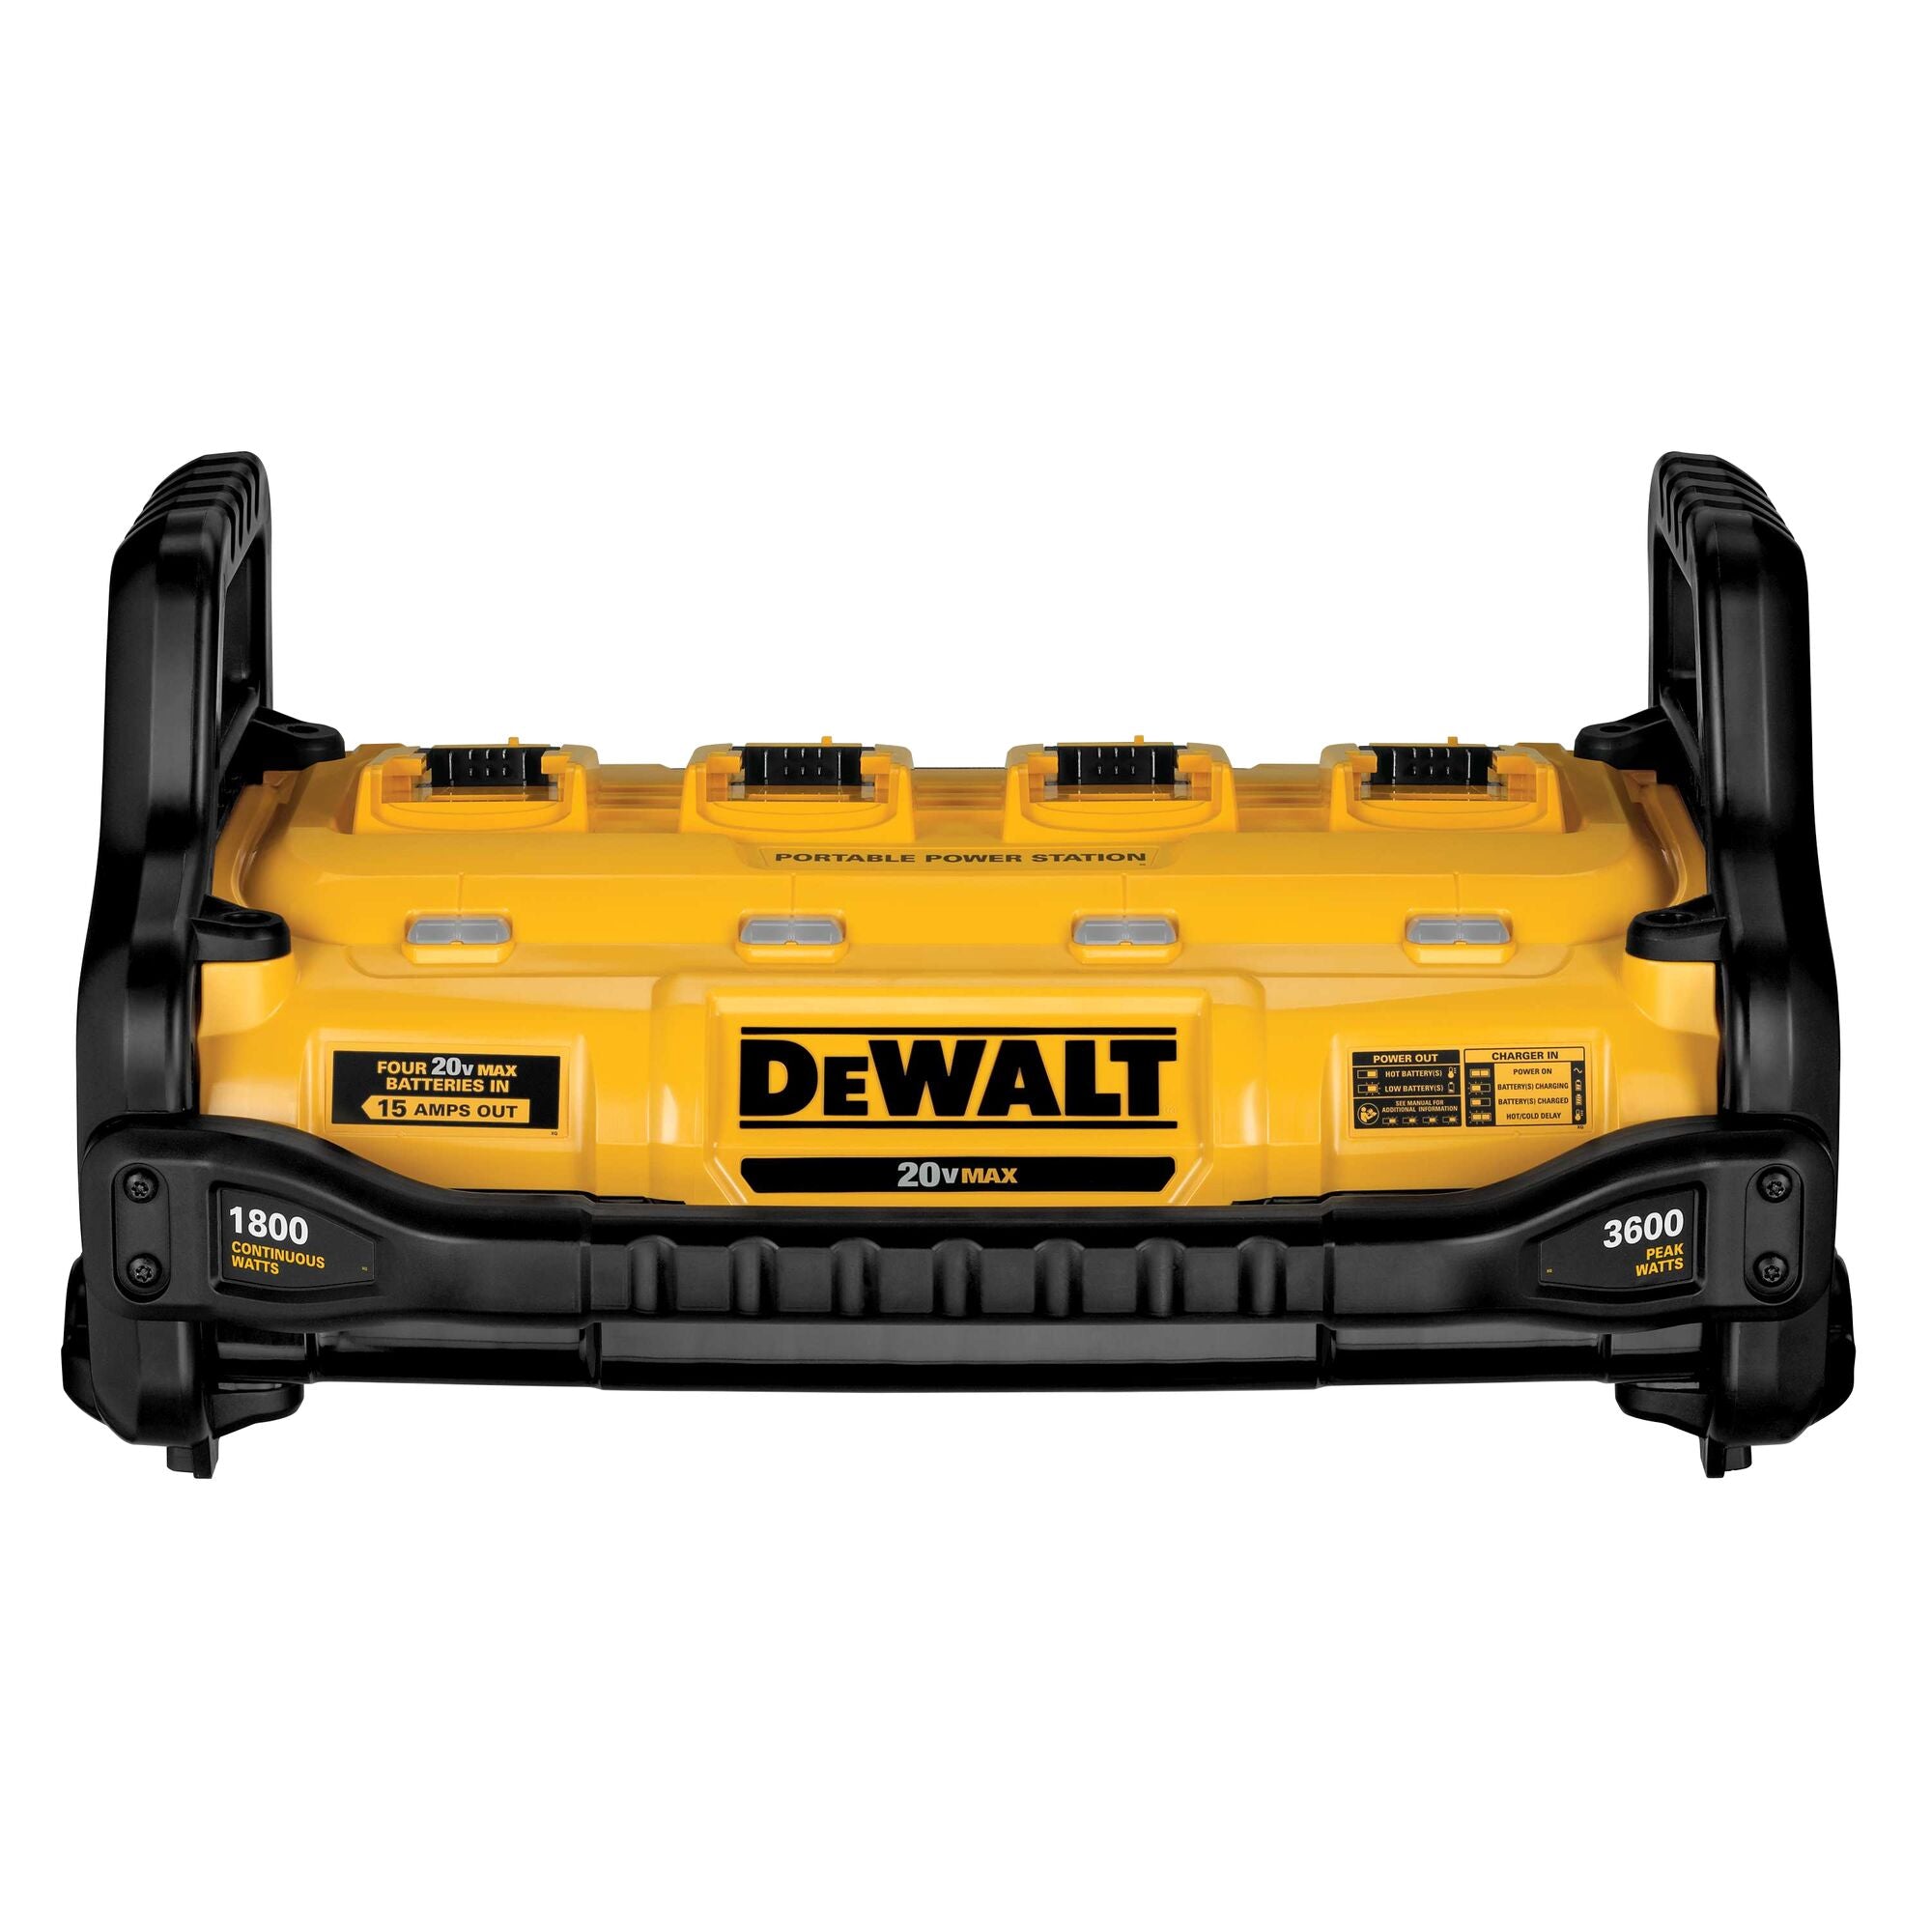 DEWALT DWDUSTEXTKIT1 10 Gallon Wet/Dry HEPA Dust Extractor with Automatic Filter Clean Kit with 1800 Watt FLEXVOLT Portable Power Station and Dust Extractor Storage Accessory Rack